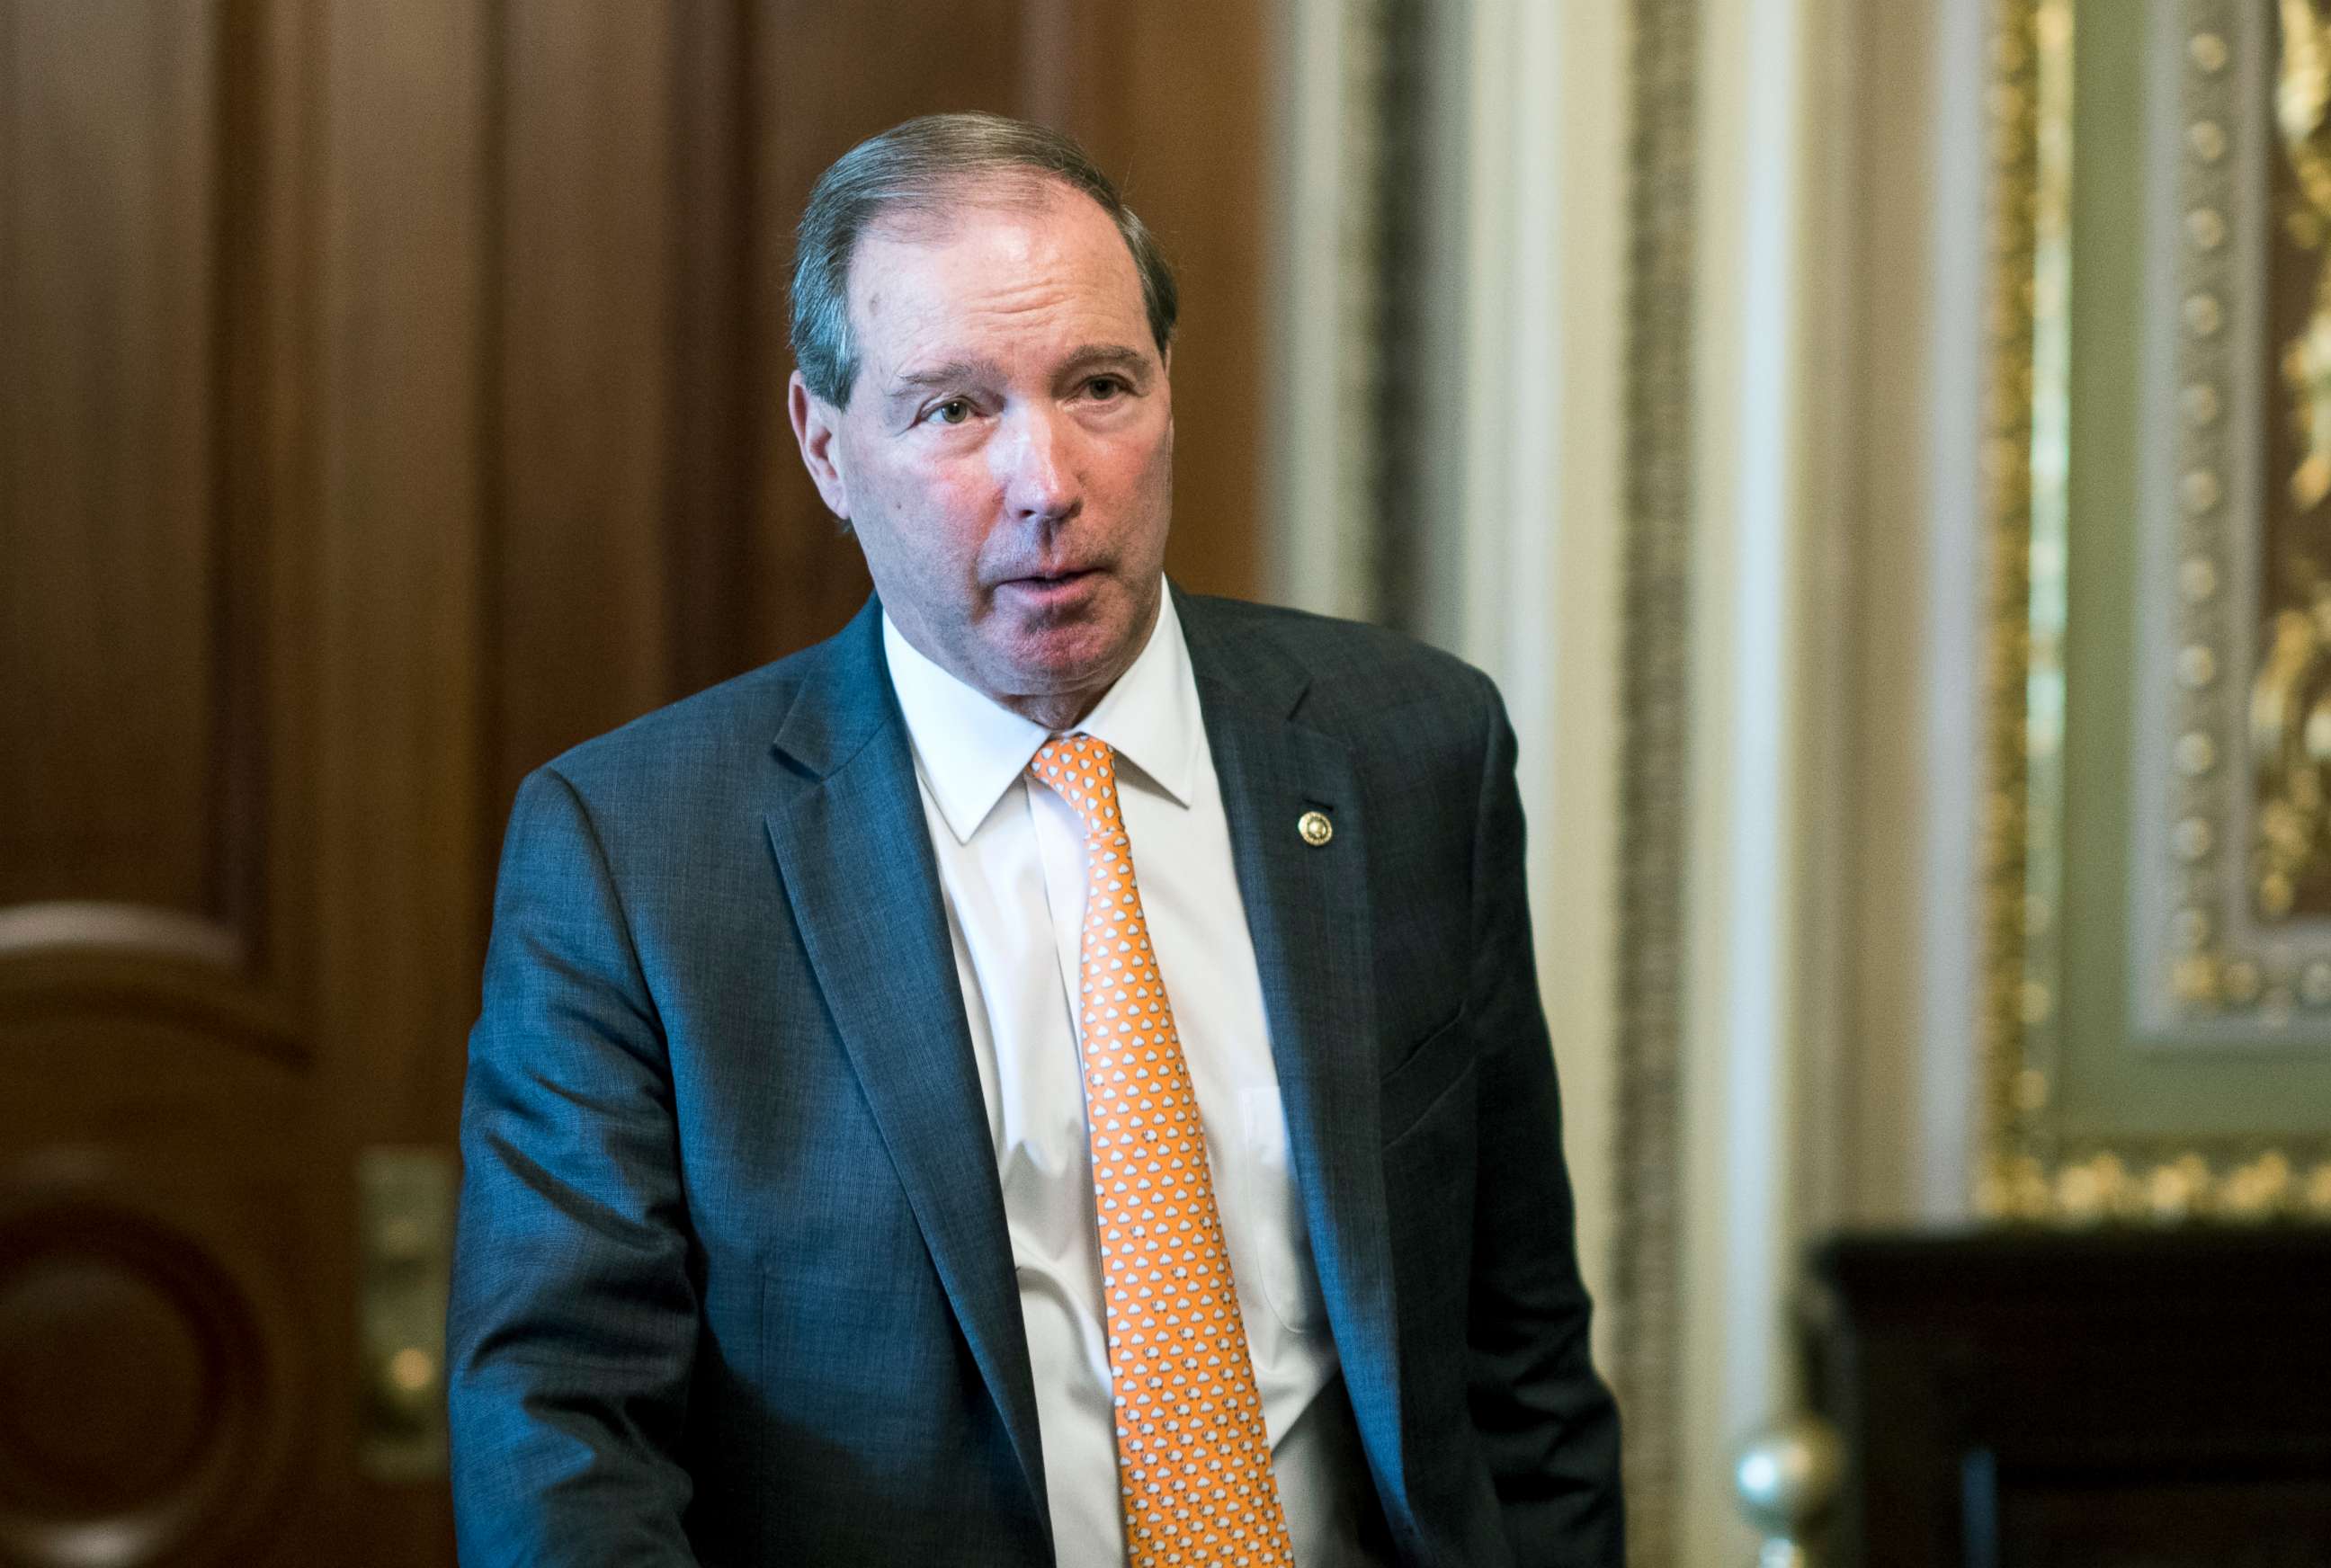 PHOTO: Sen. Tom Udall leaves the Senate Democrats' policy lunch, Oct. 10, 2018, in Washington, DC.